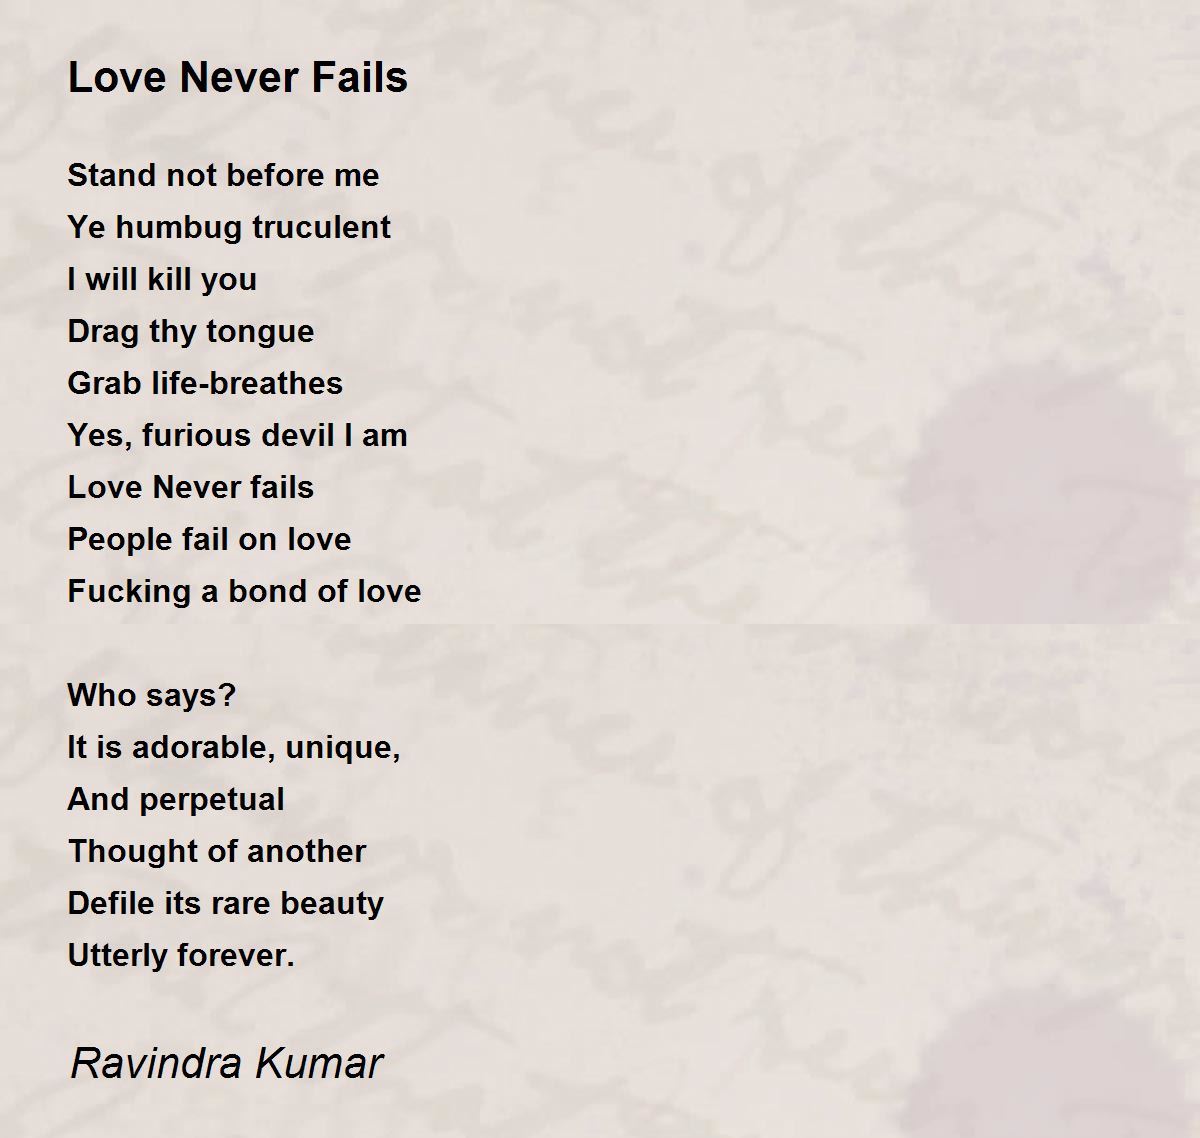 Your Love Never Fails - Your Love Never Fails Poem by JeT Campe